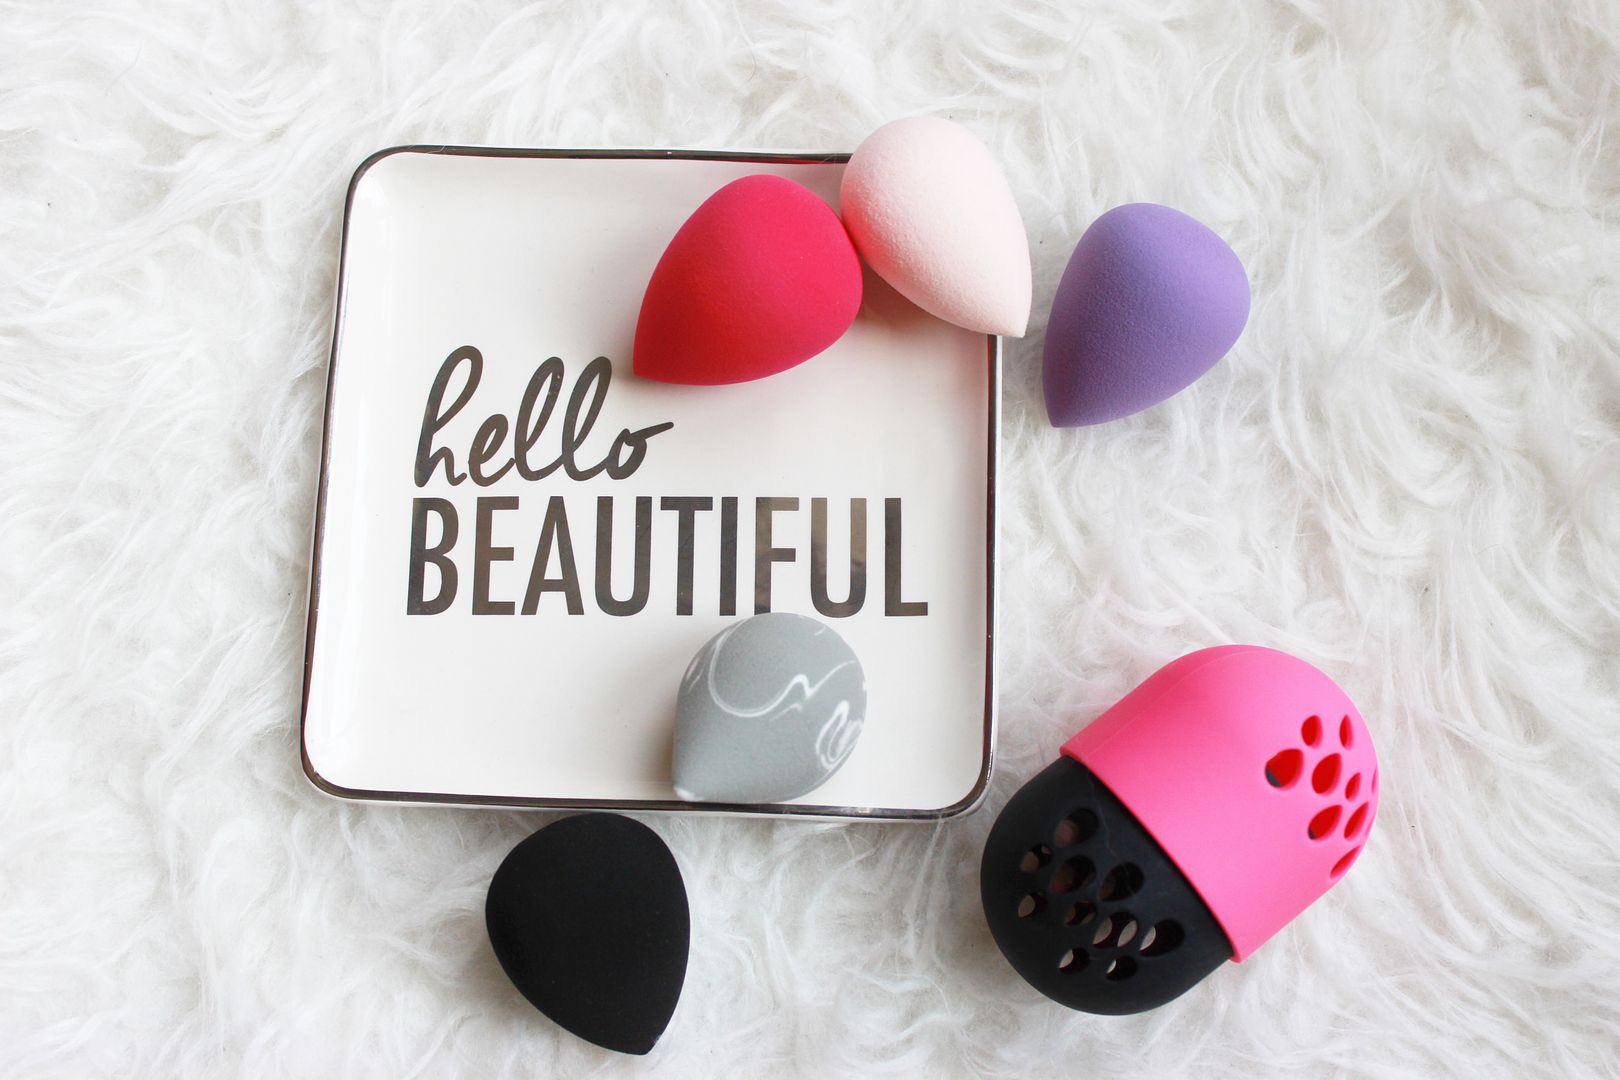 Beauty Blenders Compared